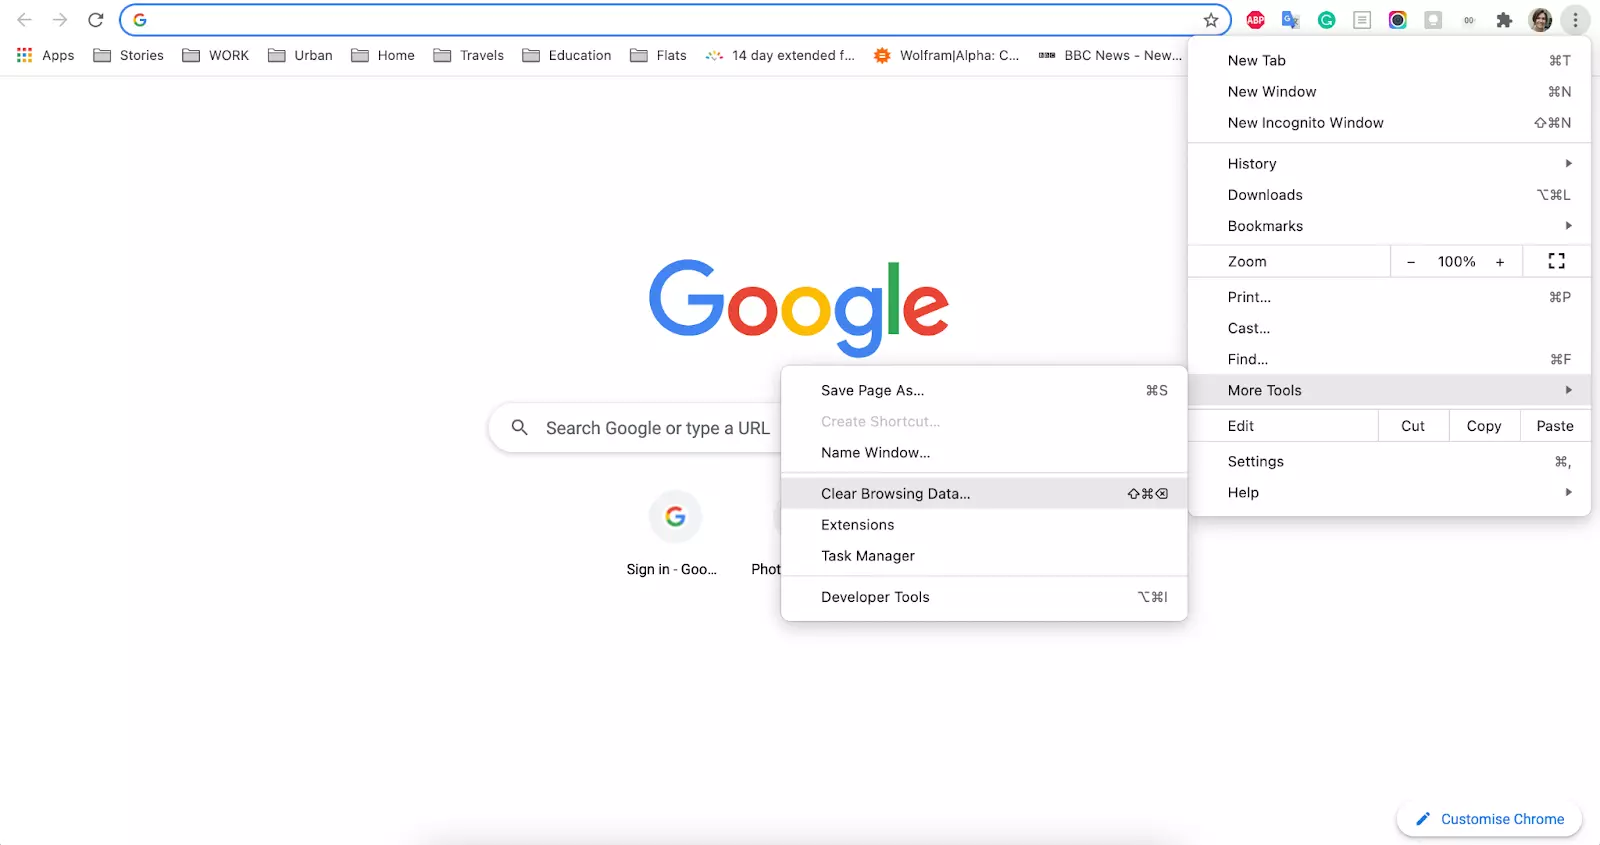 How to clear browser data in Chrome